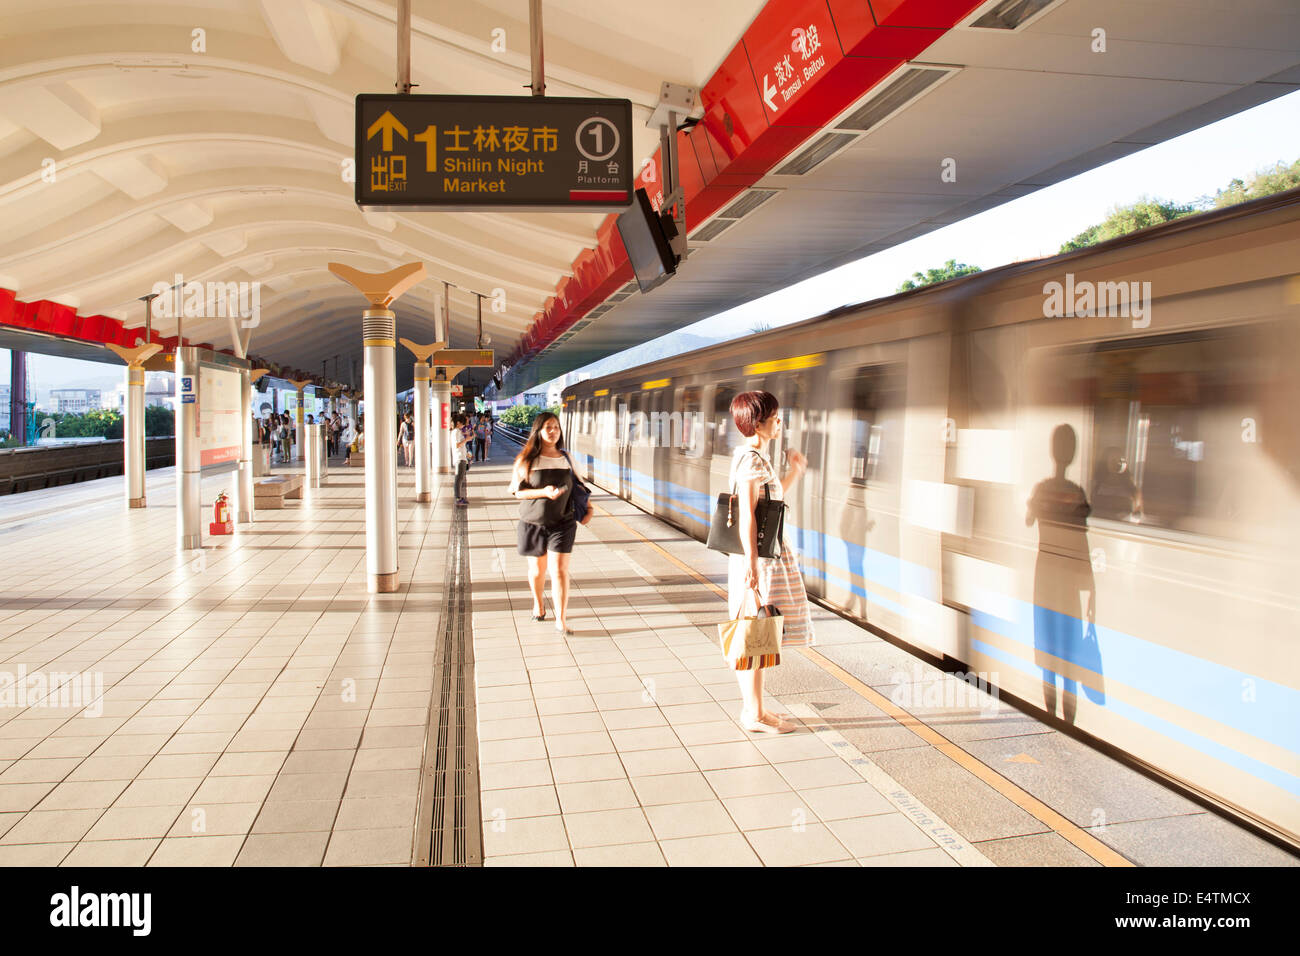 A woman waiting for an arriving train at the Shilin Metro (MRT) Station on July 7, 2014 in Taipei, Taiwan. (CTK Photo/Karel Picha) Stock Photo